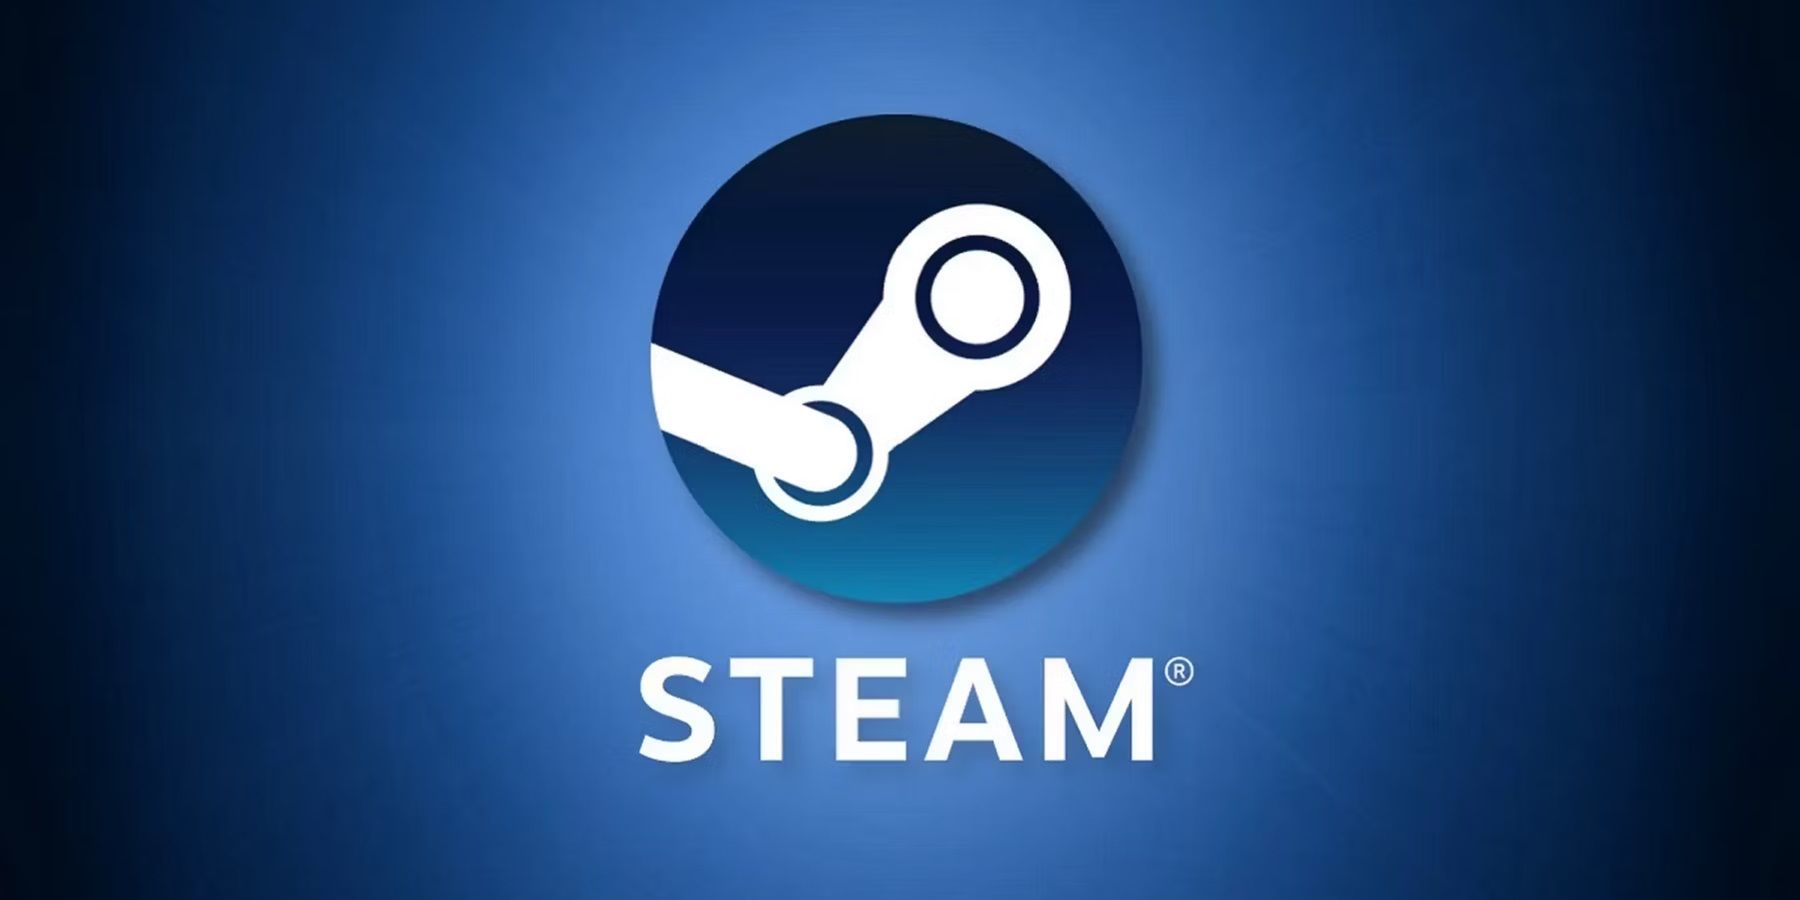 Steam Deck Tops the Steam Charts, Dave the Diver Debuts